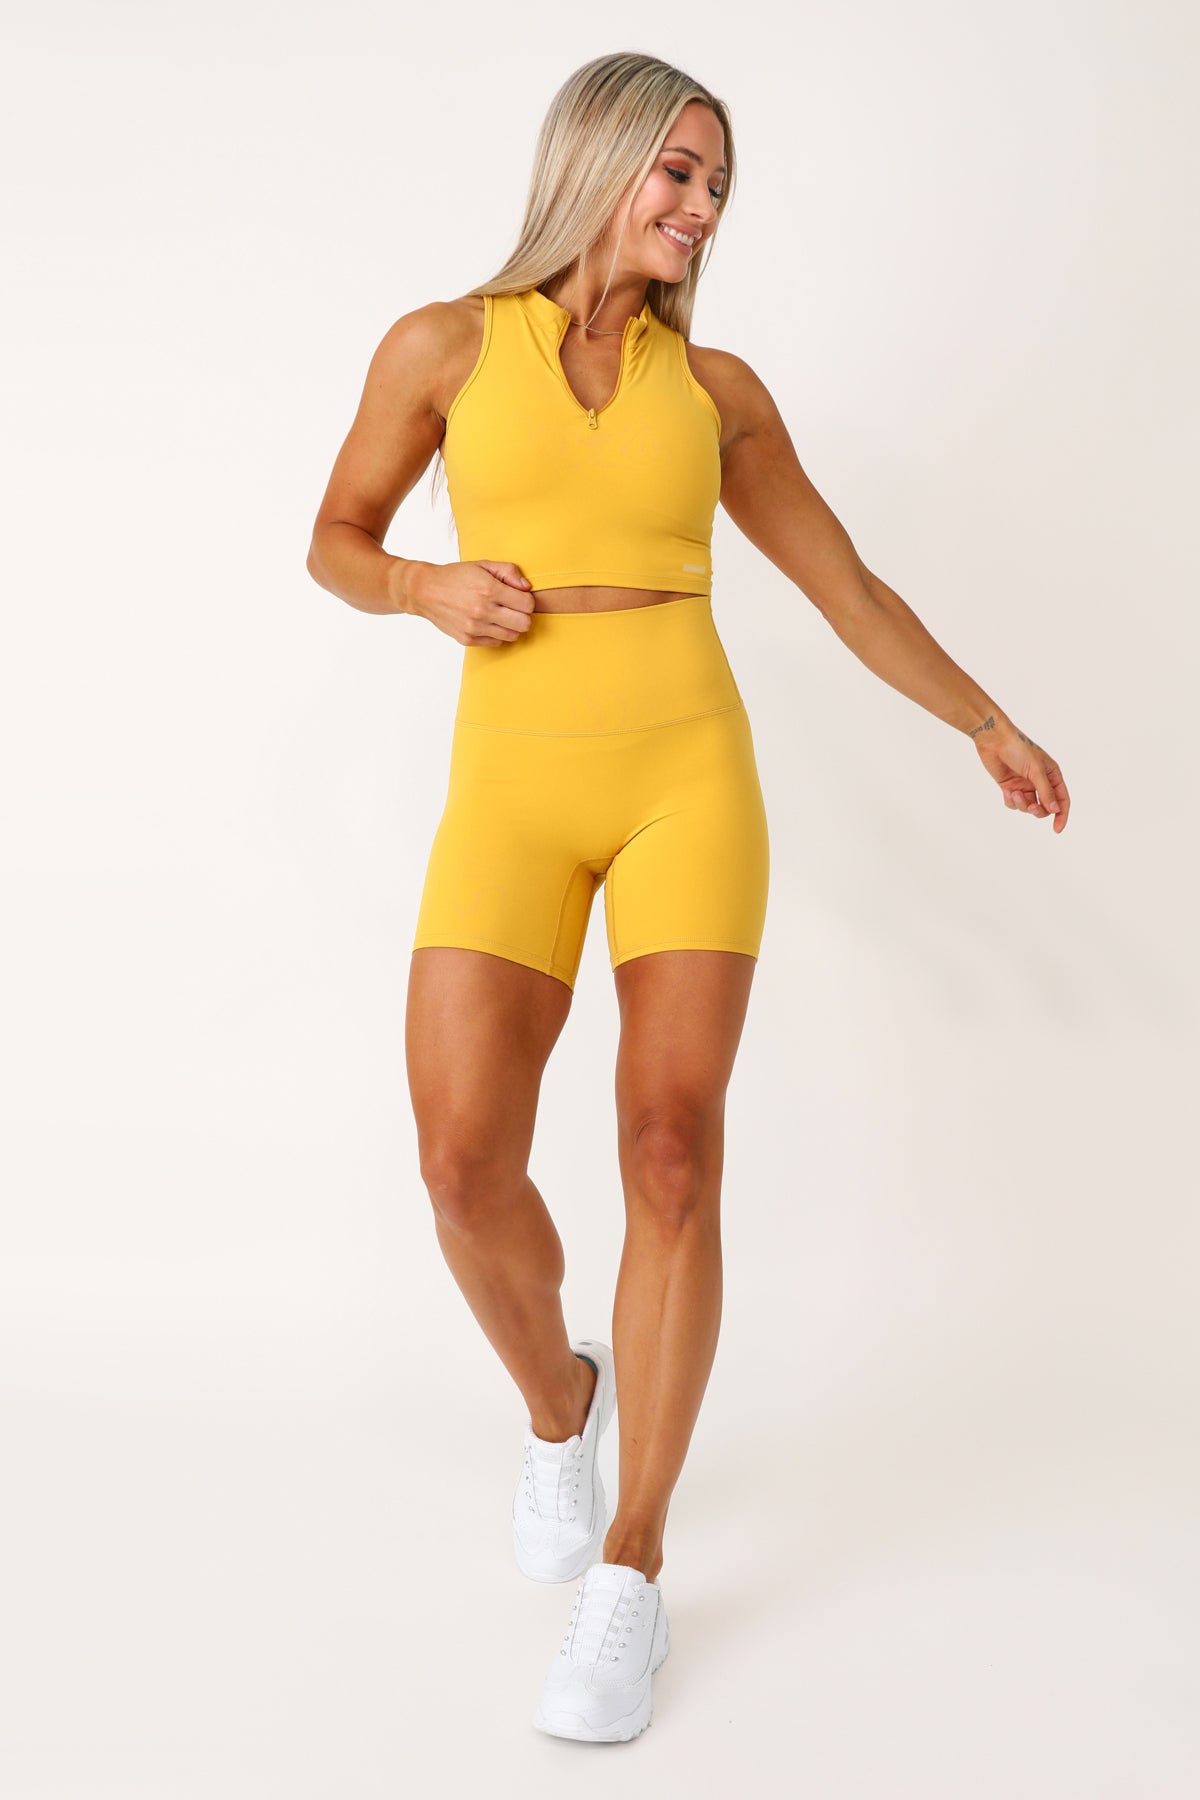 Model wearing the All Star Active yellow shorts.